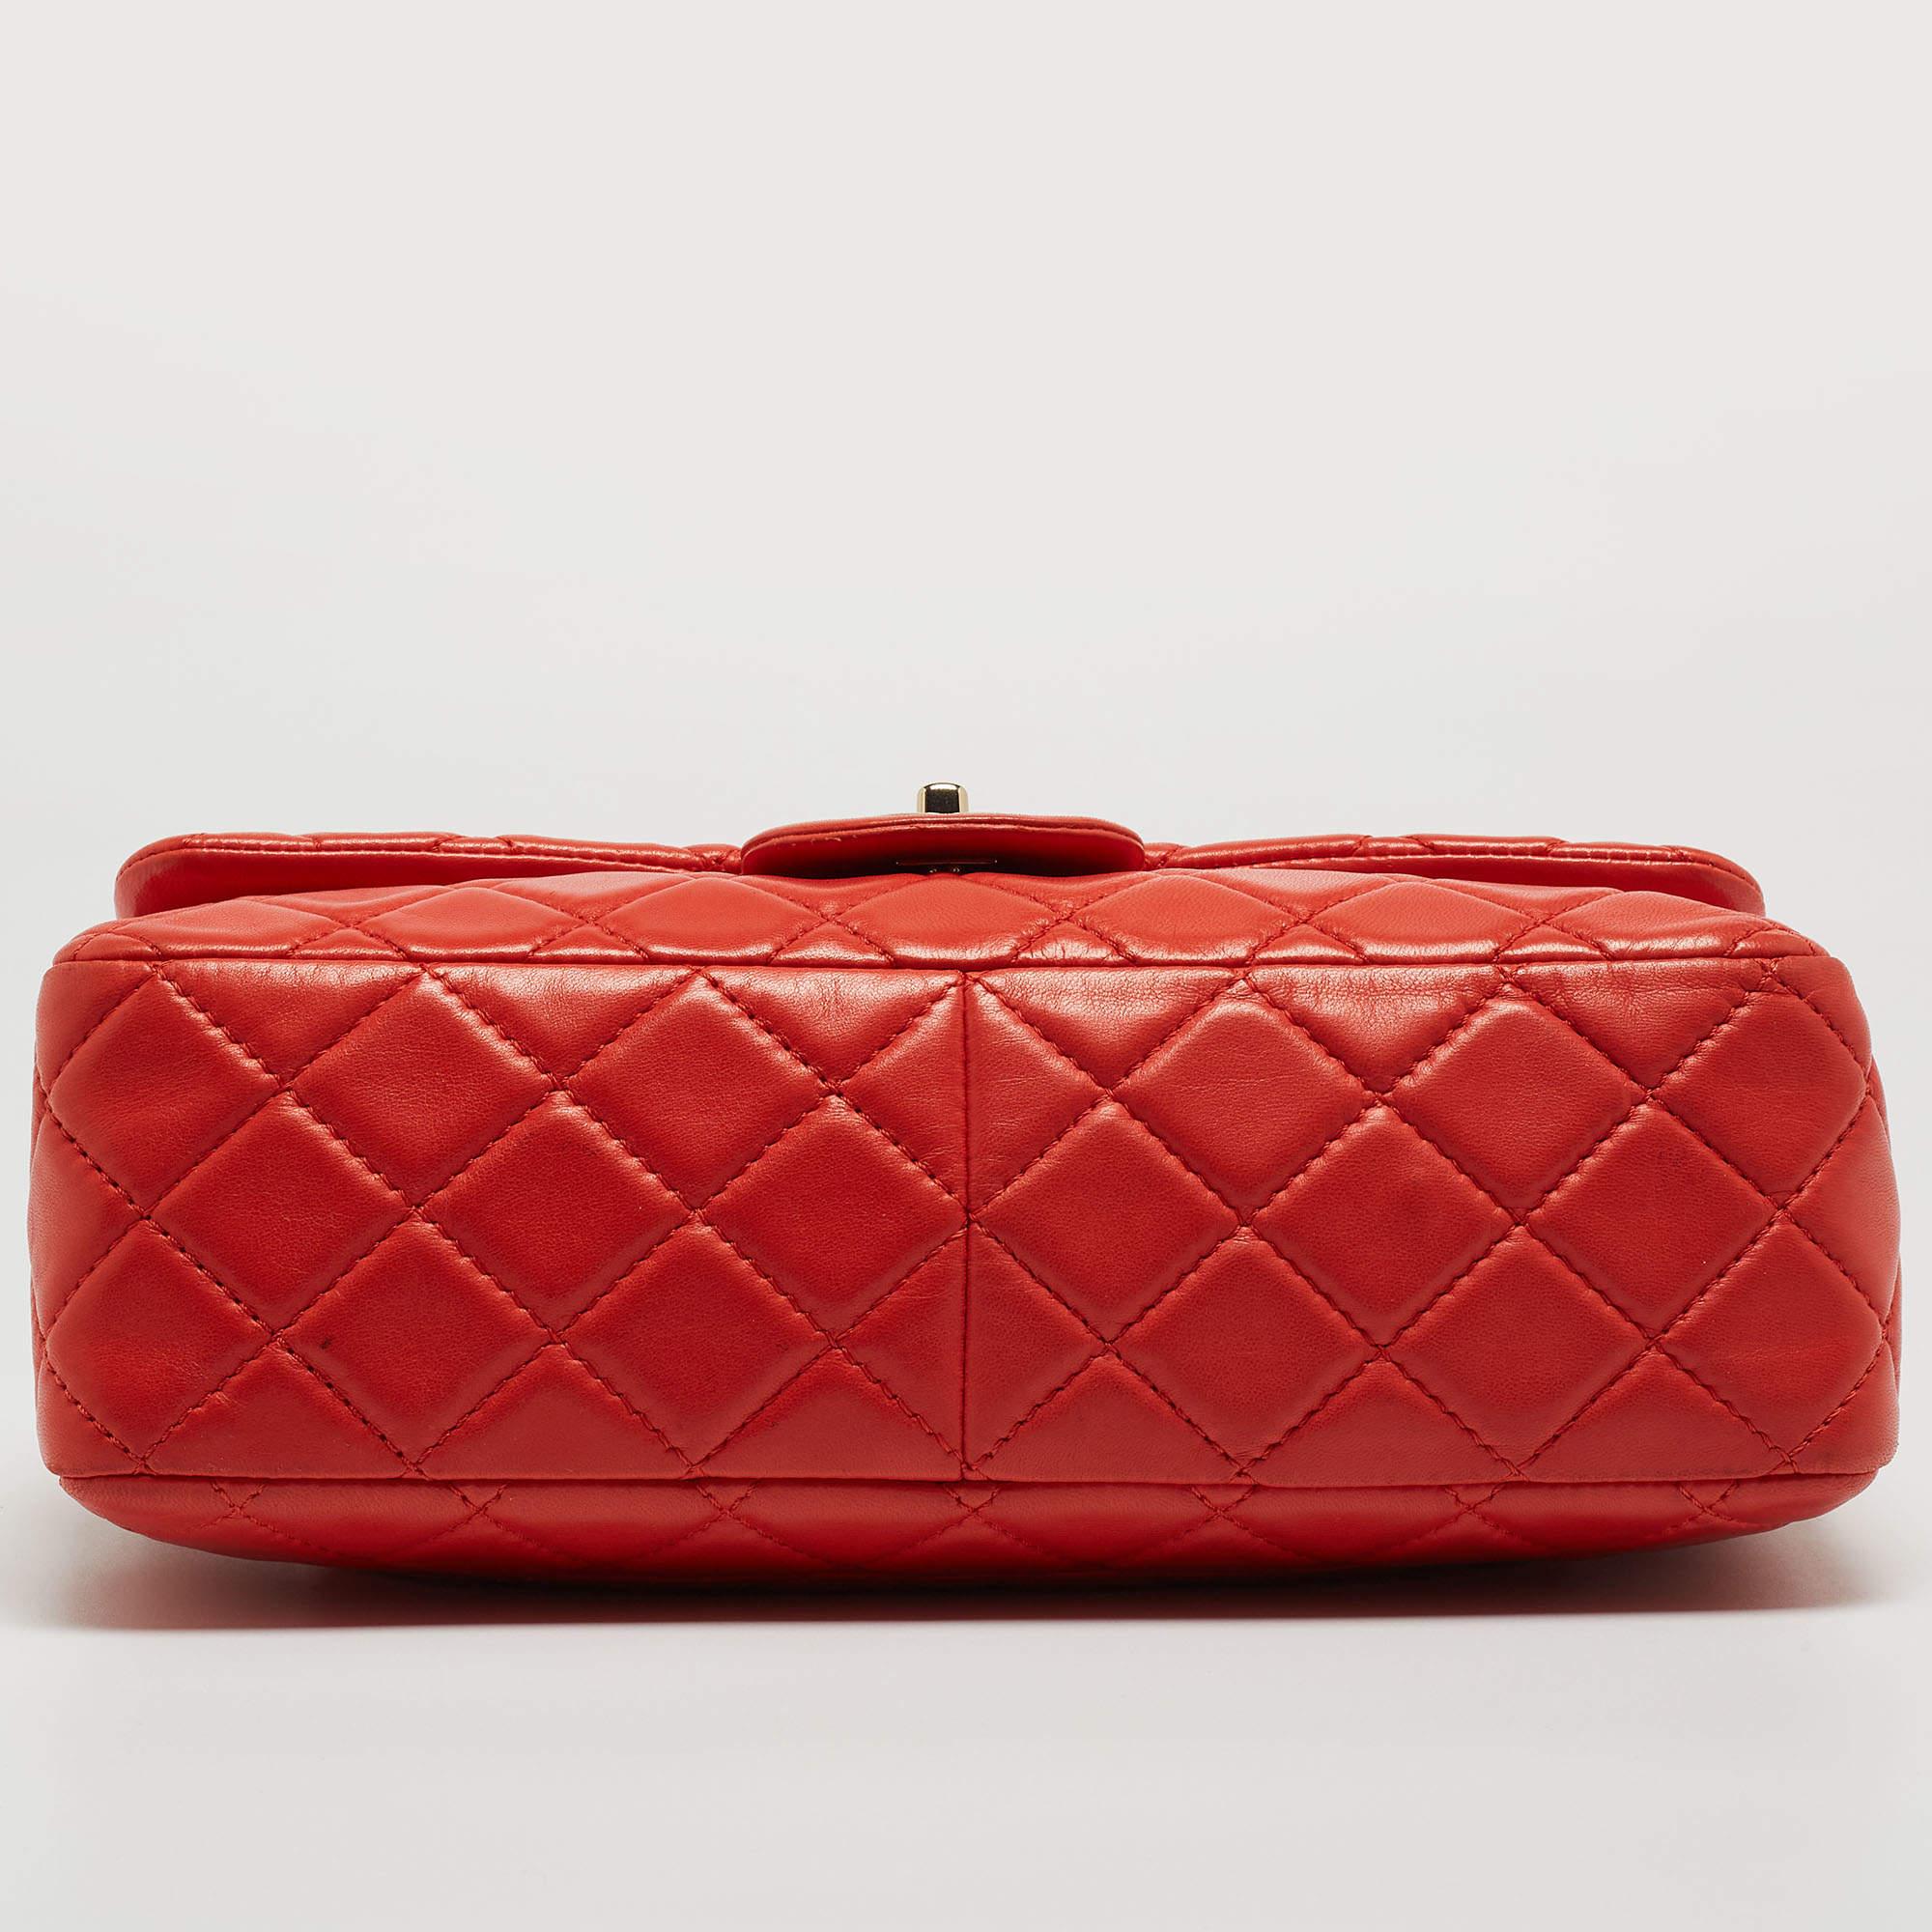 Chanel Red Quilted Lambskin Leather Jumbo Classic Single Flap Bag For Sale 7